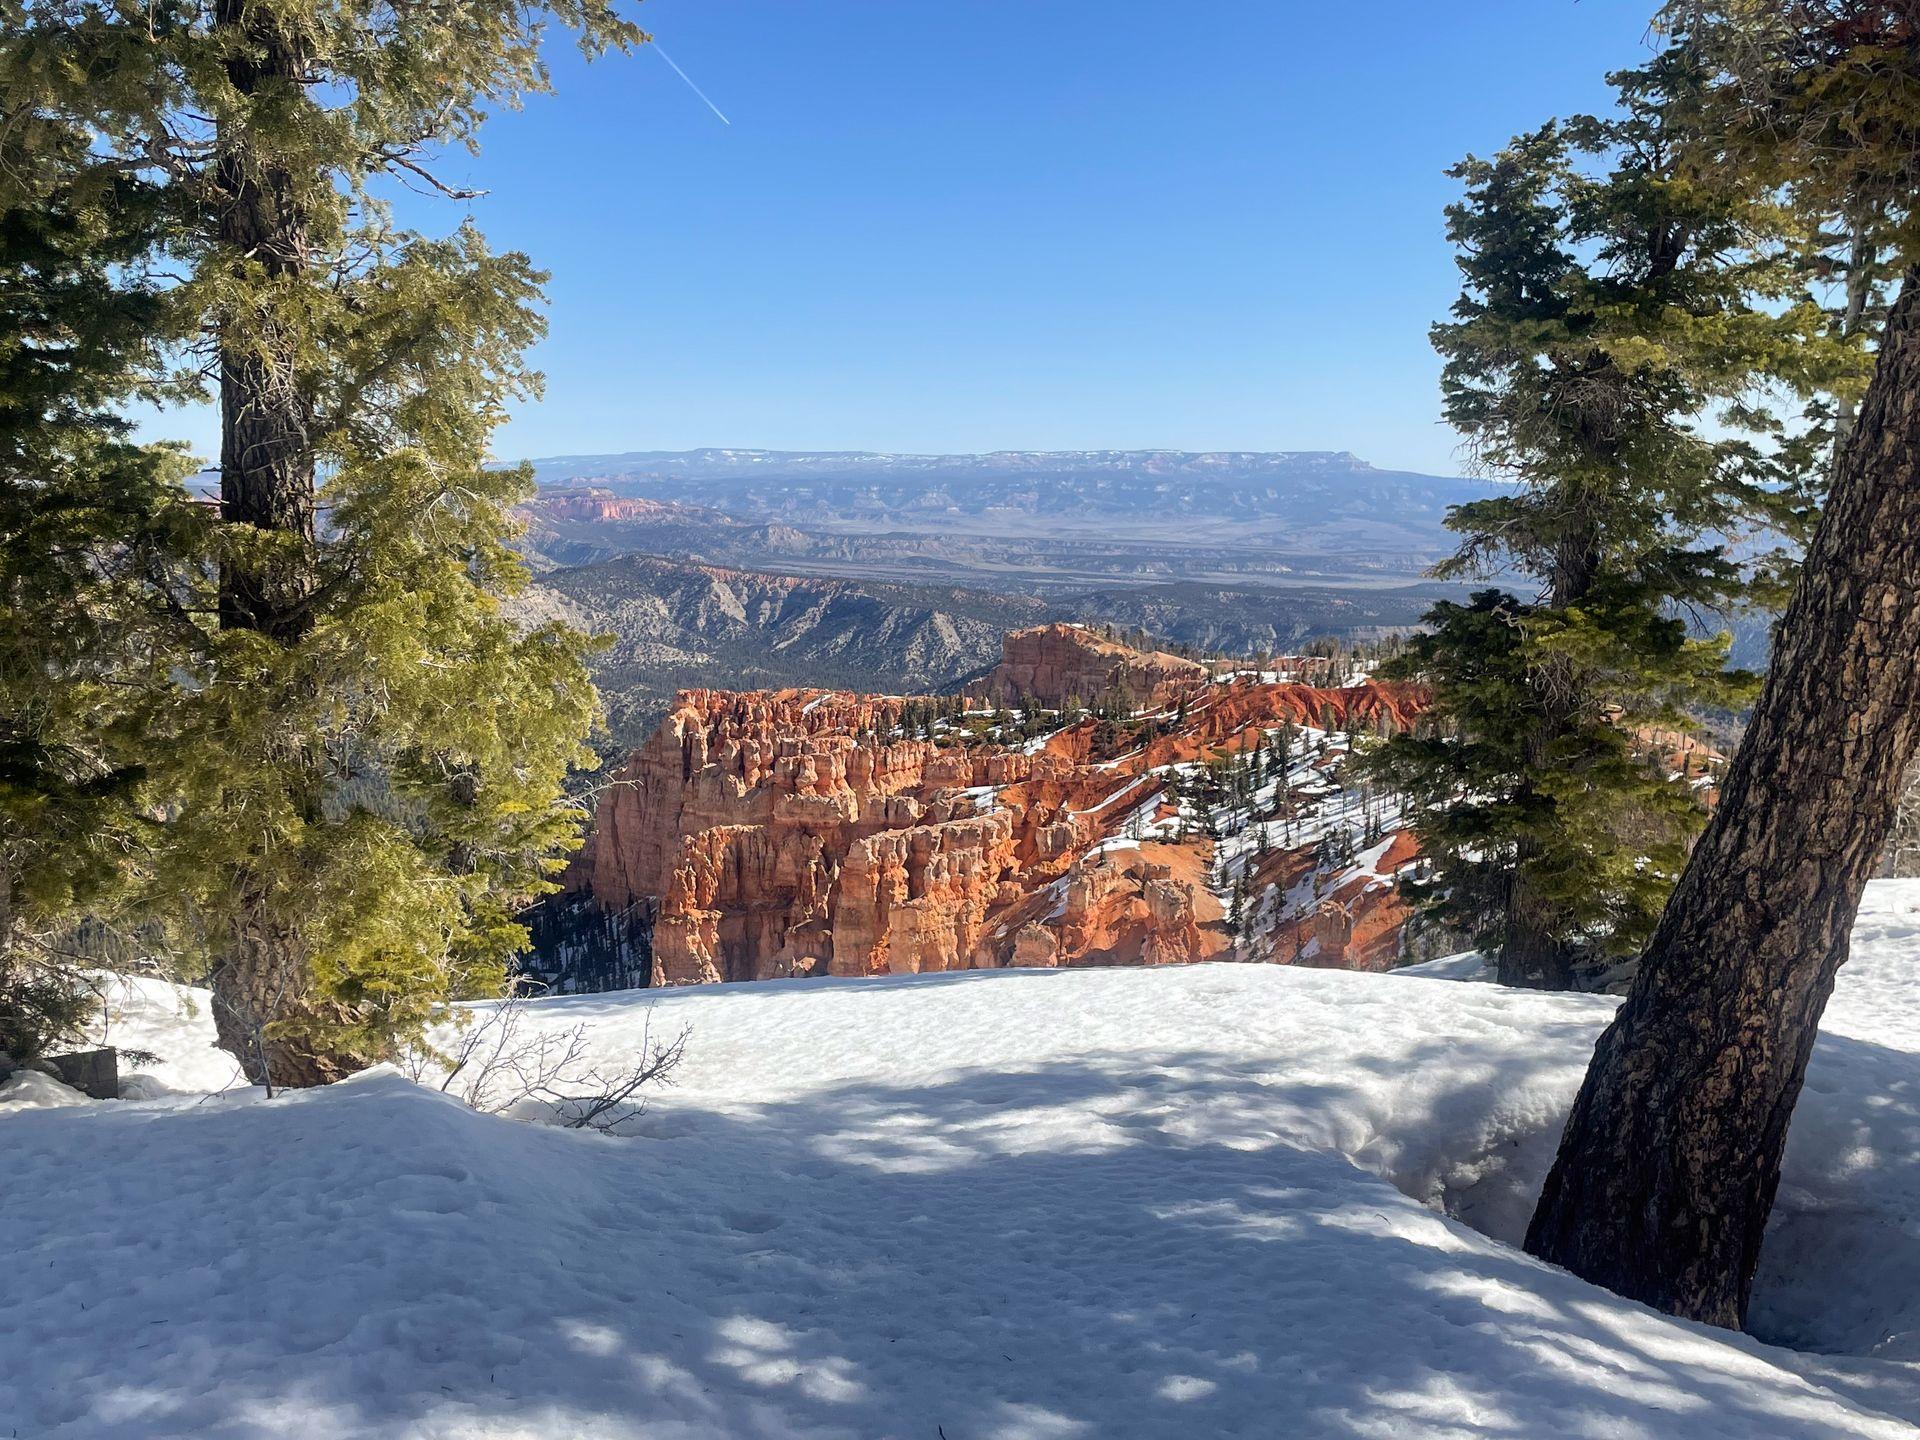 Looking out at a canyon between trees on a snow-covered Bristlecone Loop Trail